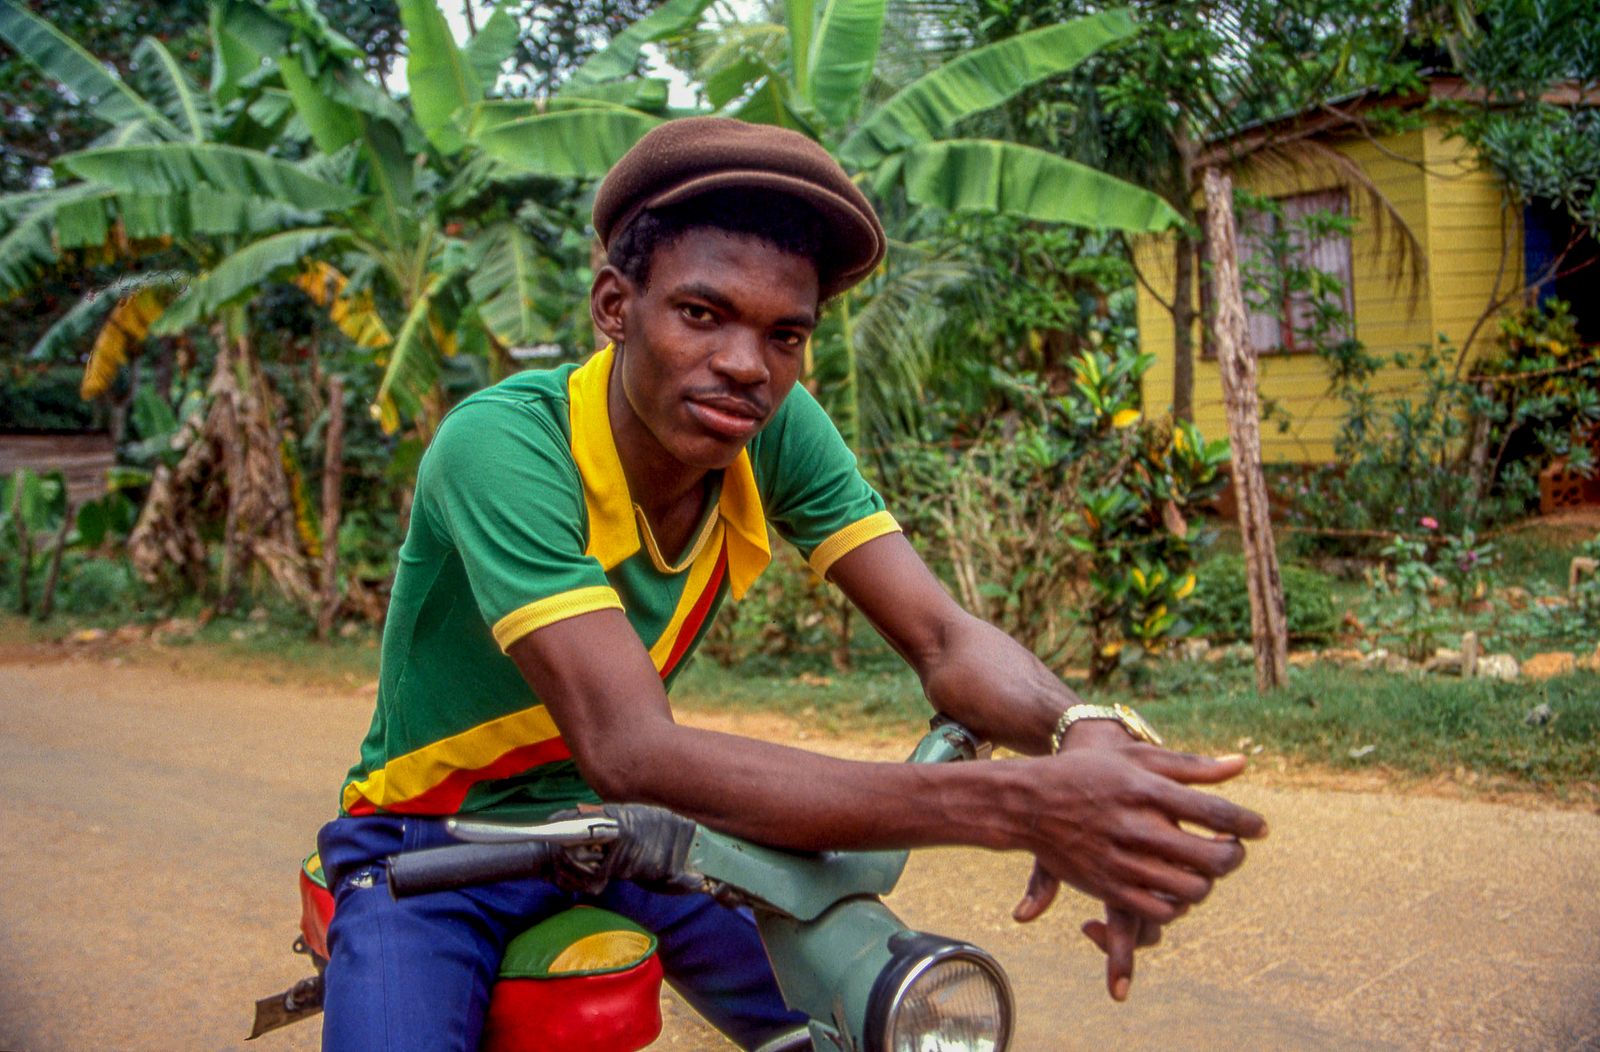 © Steven Edson - Portrait of a young man with scooter. Jamaica